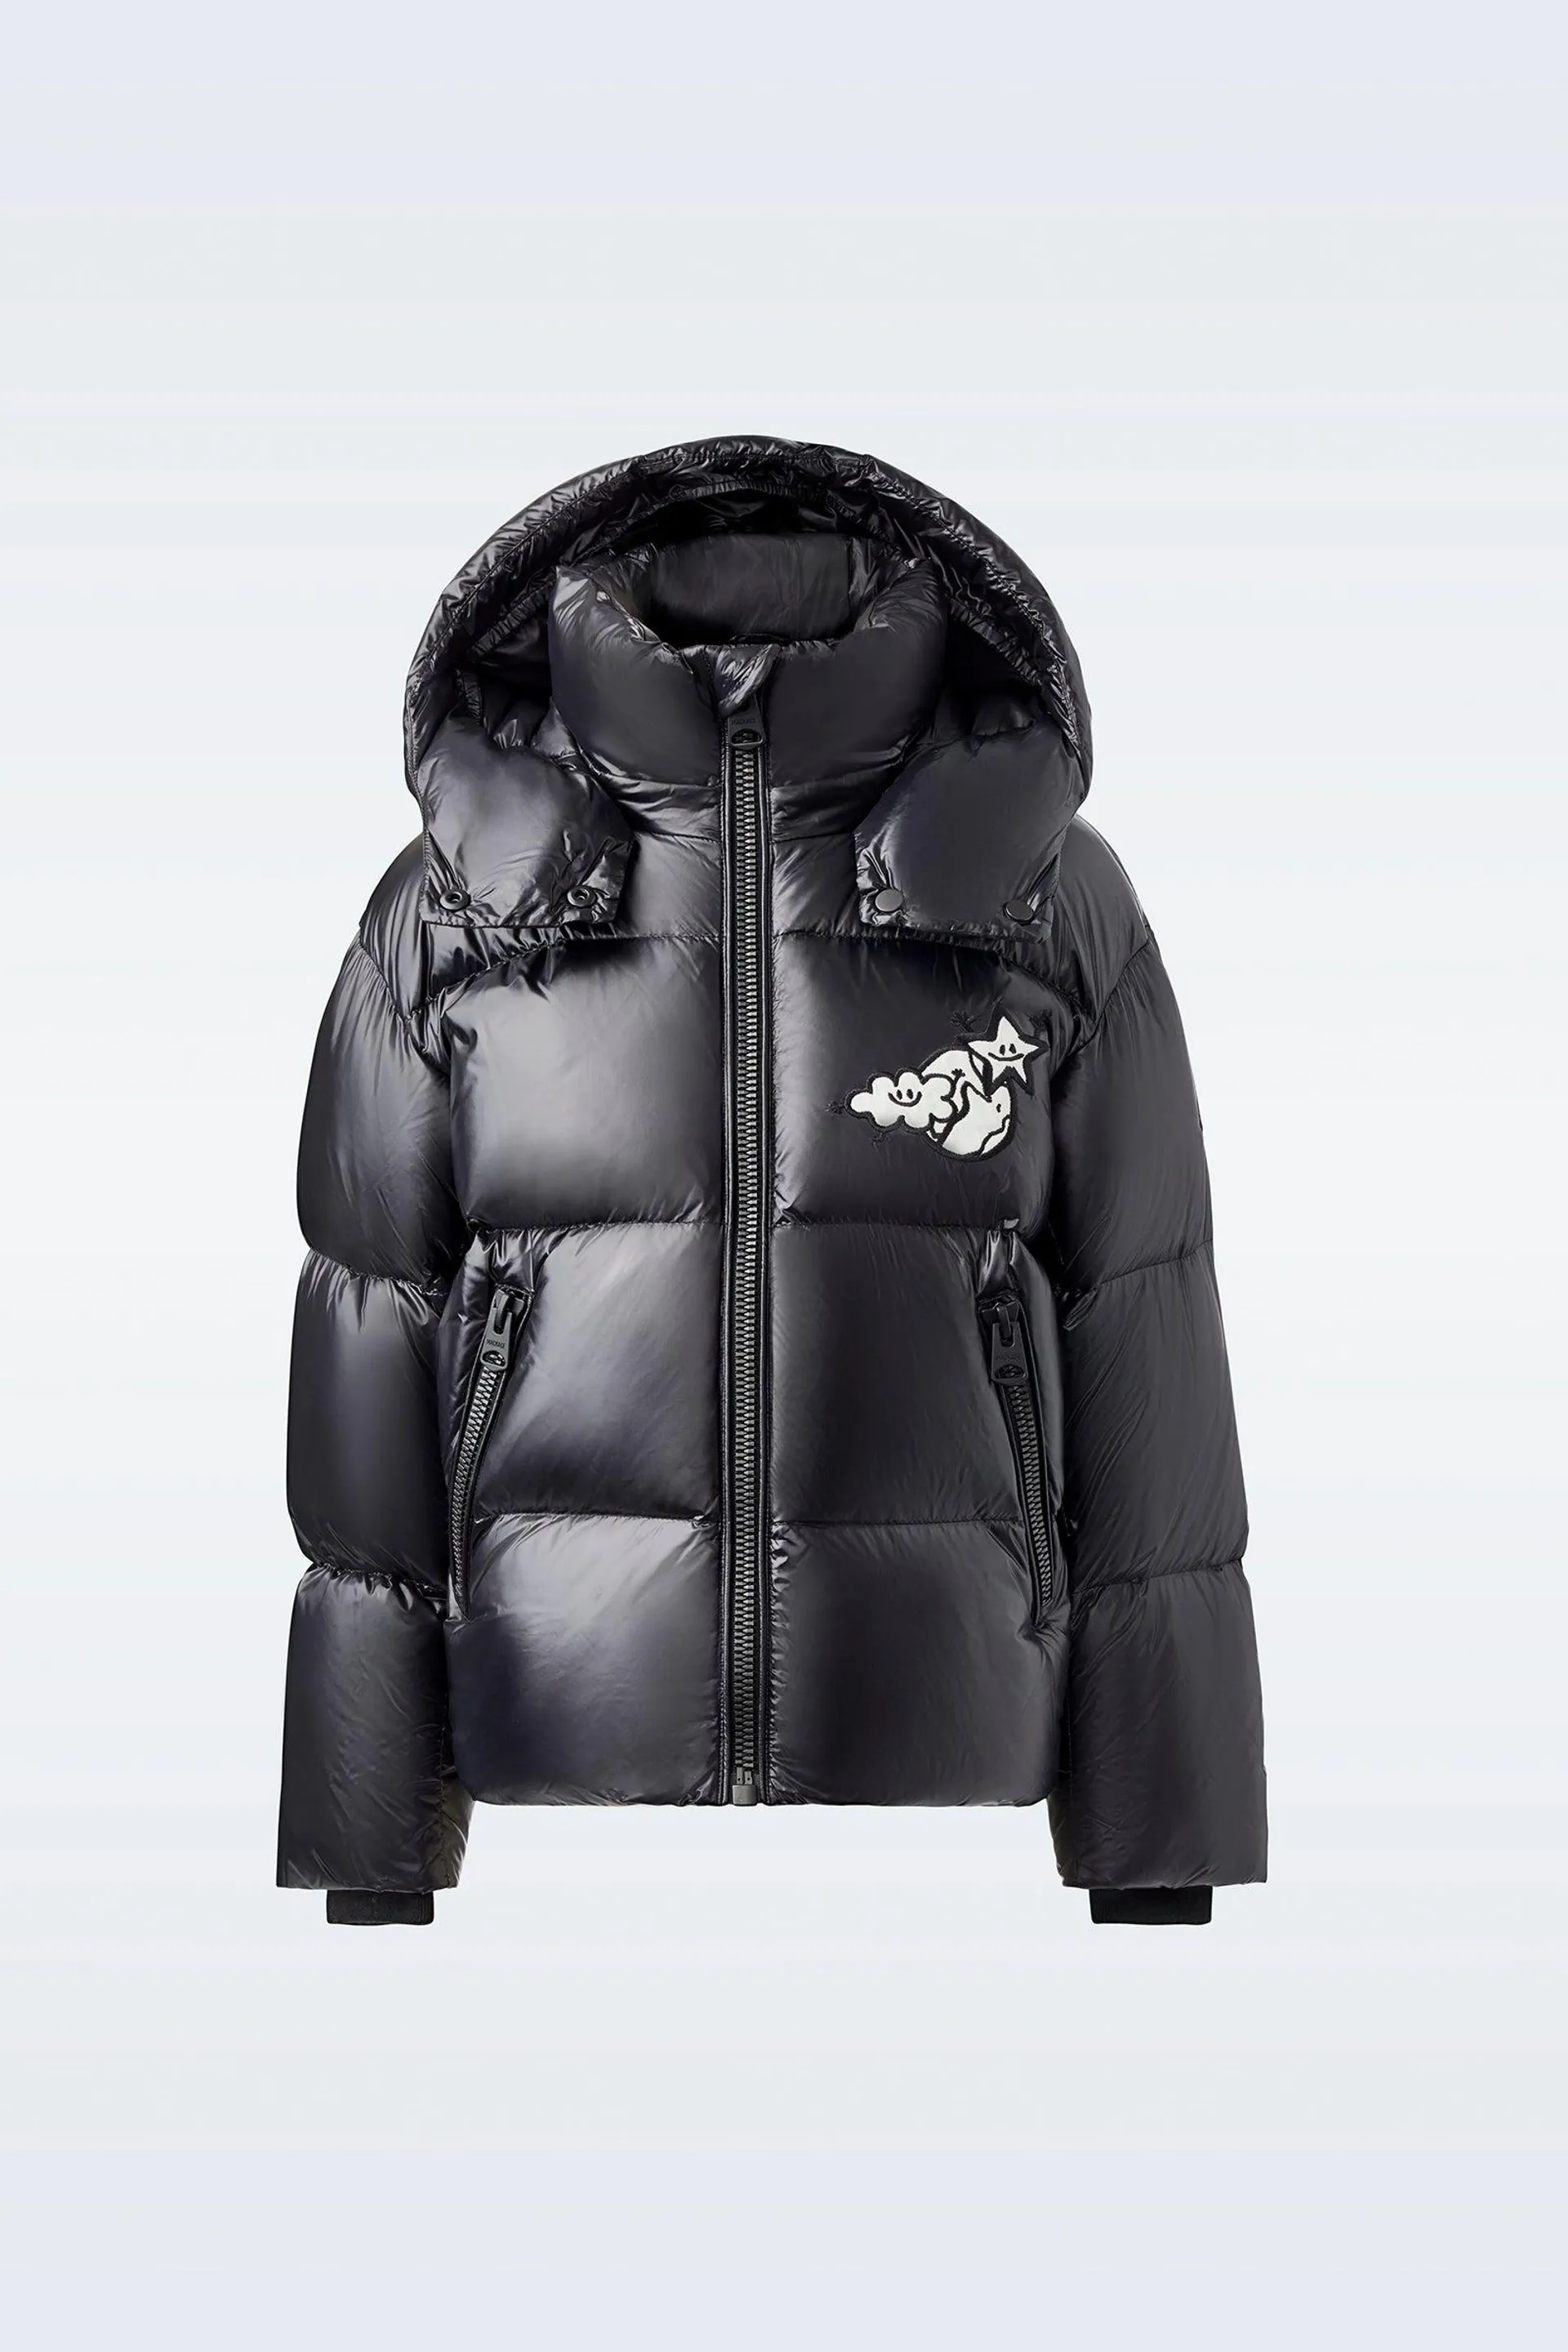 JESSE-TML Lightweight down jacket with collab logo and graphics for toddlers (2-6 years)